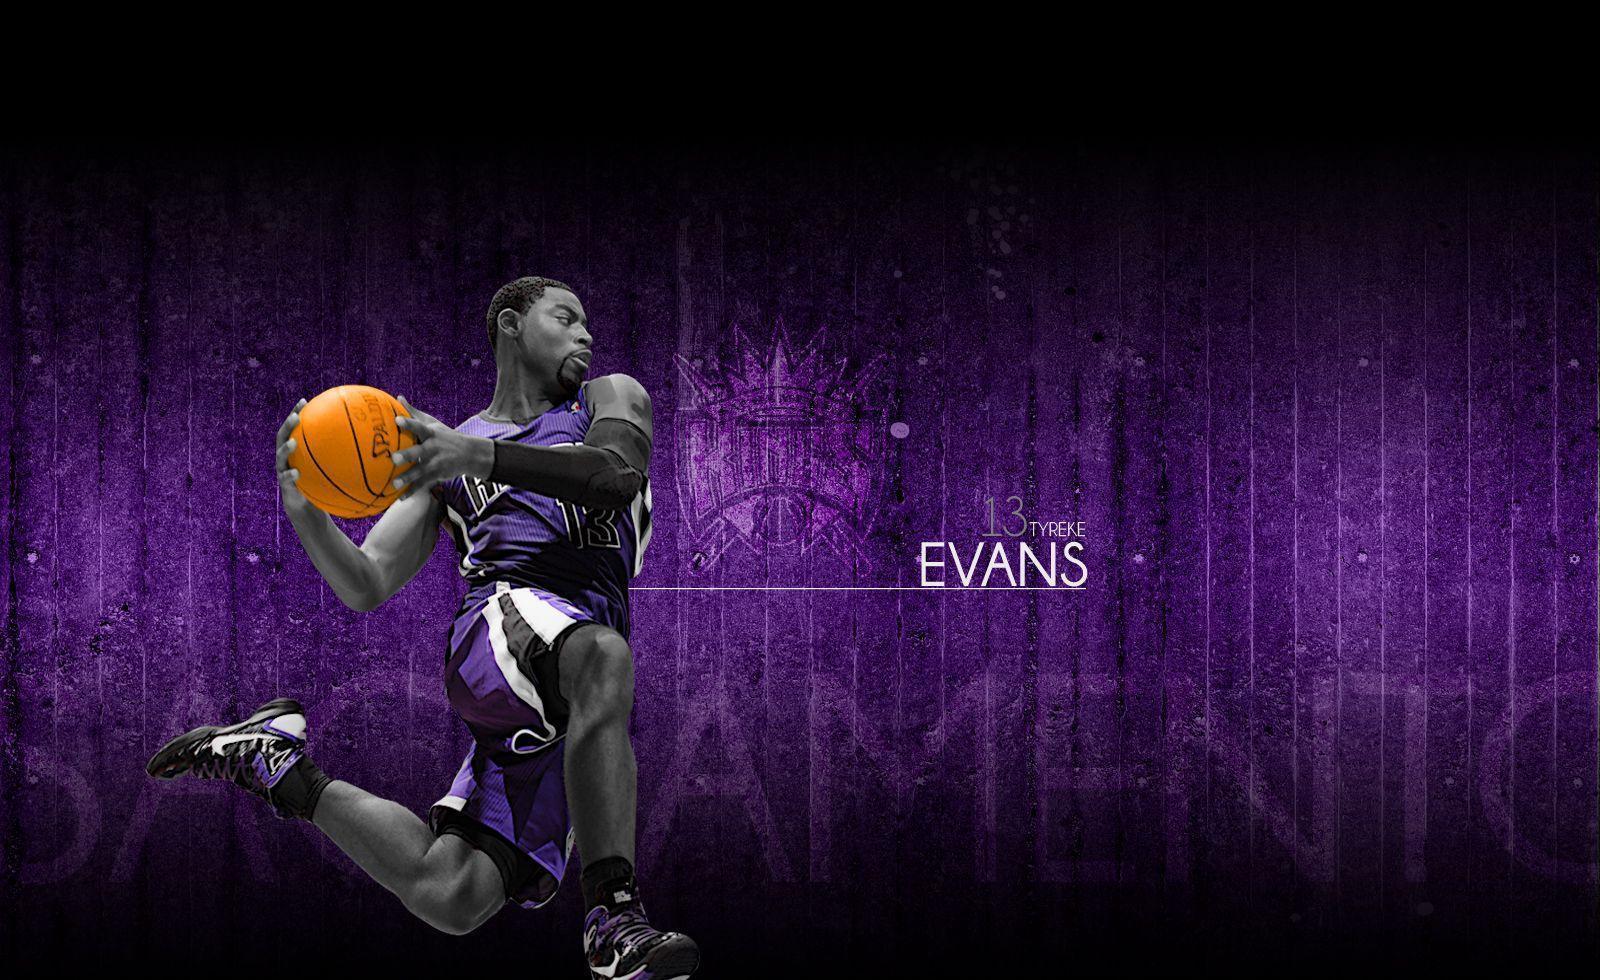 Kings 2011 All Star Wallpaper. THE OFFICIAL SITE OF THE